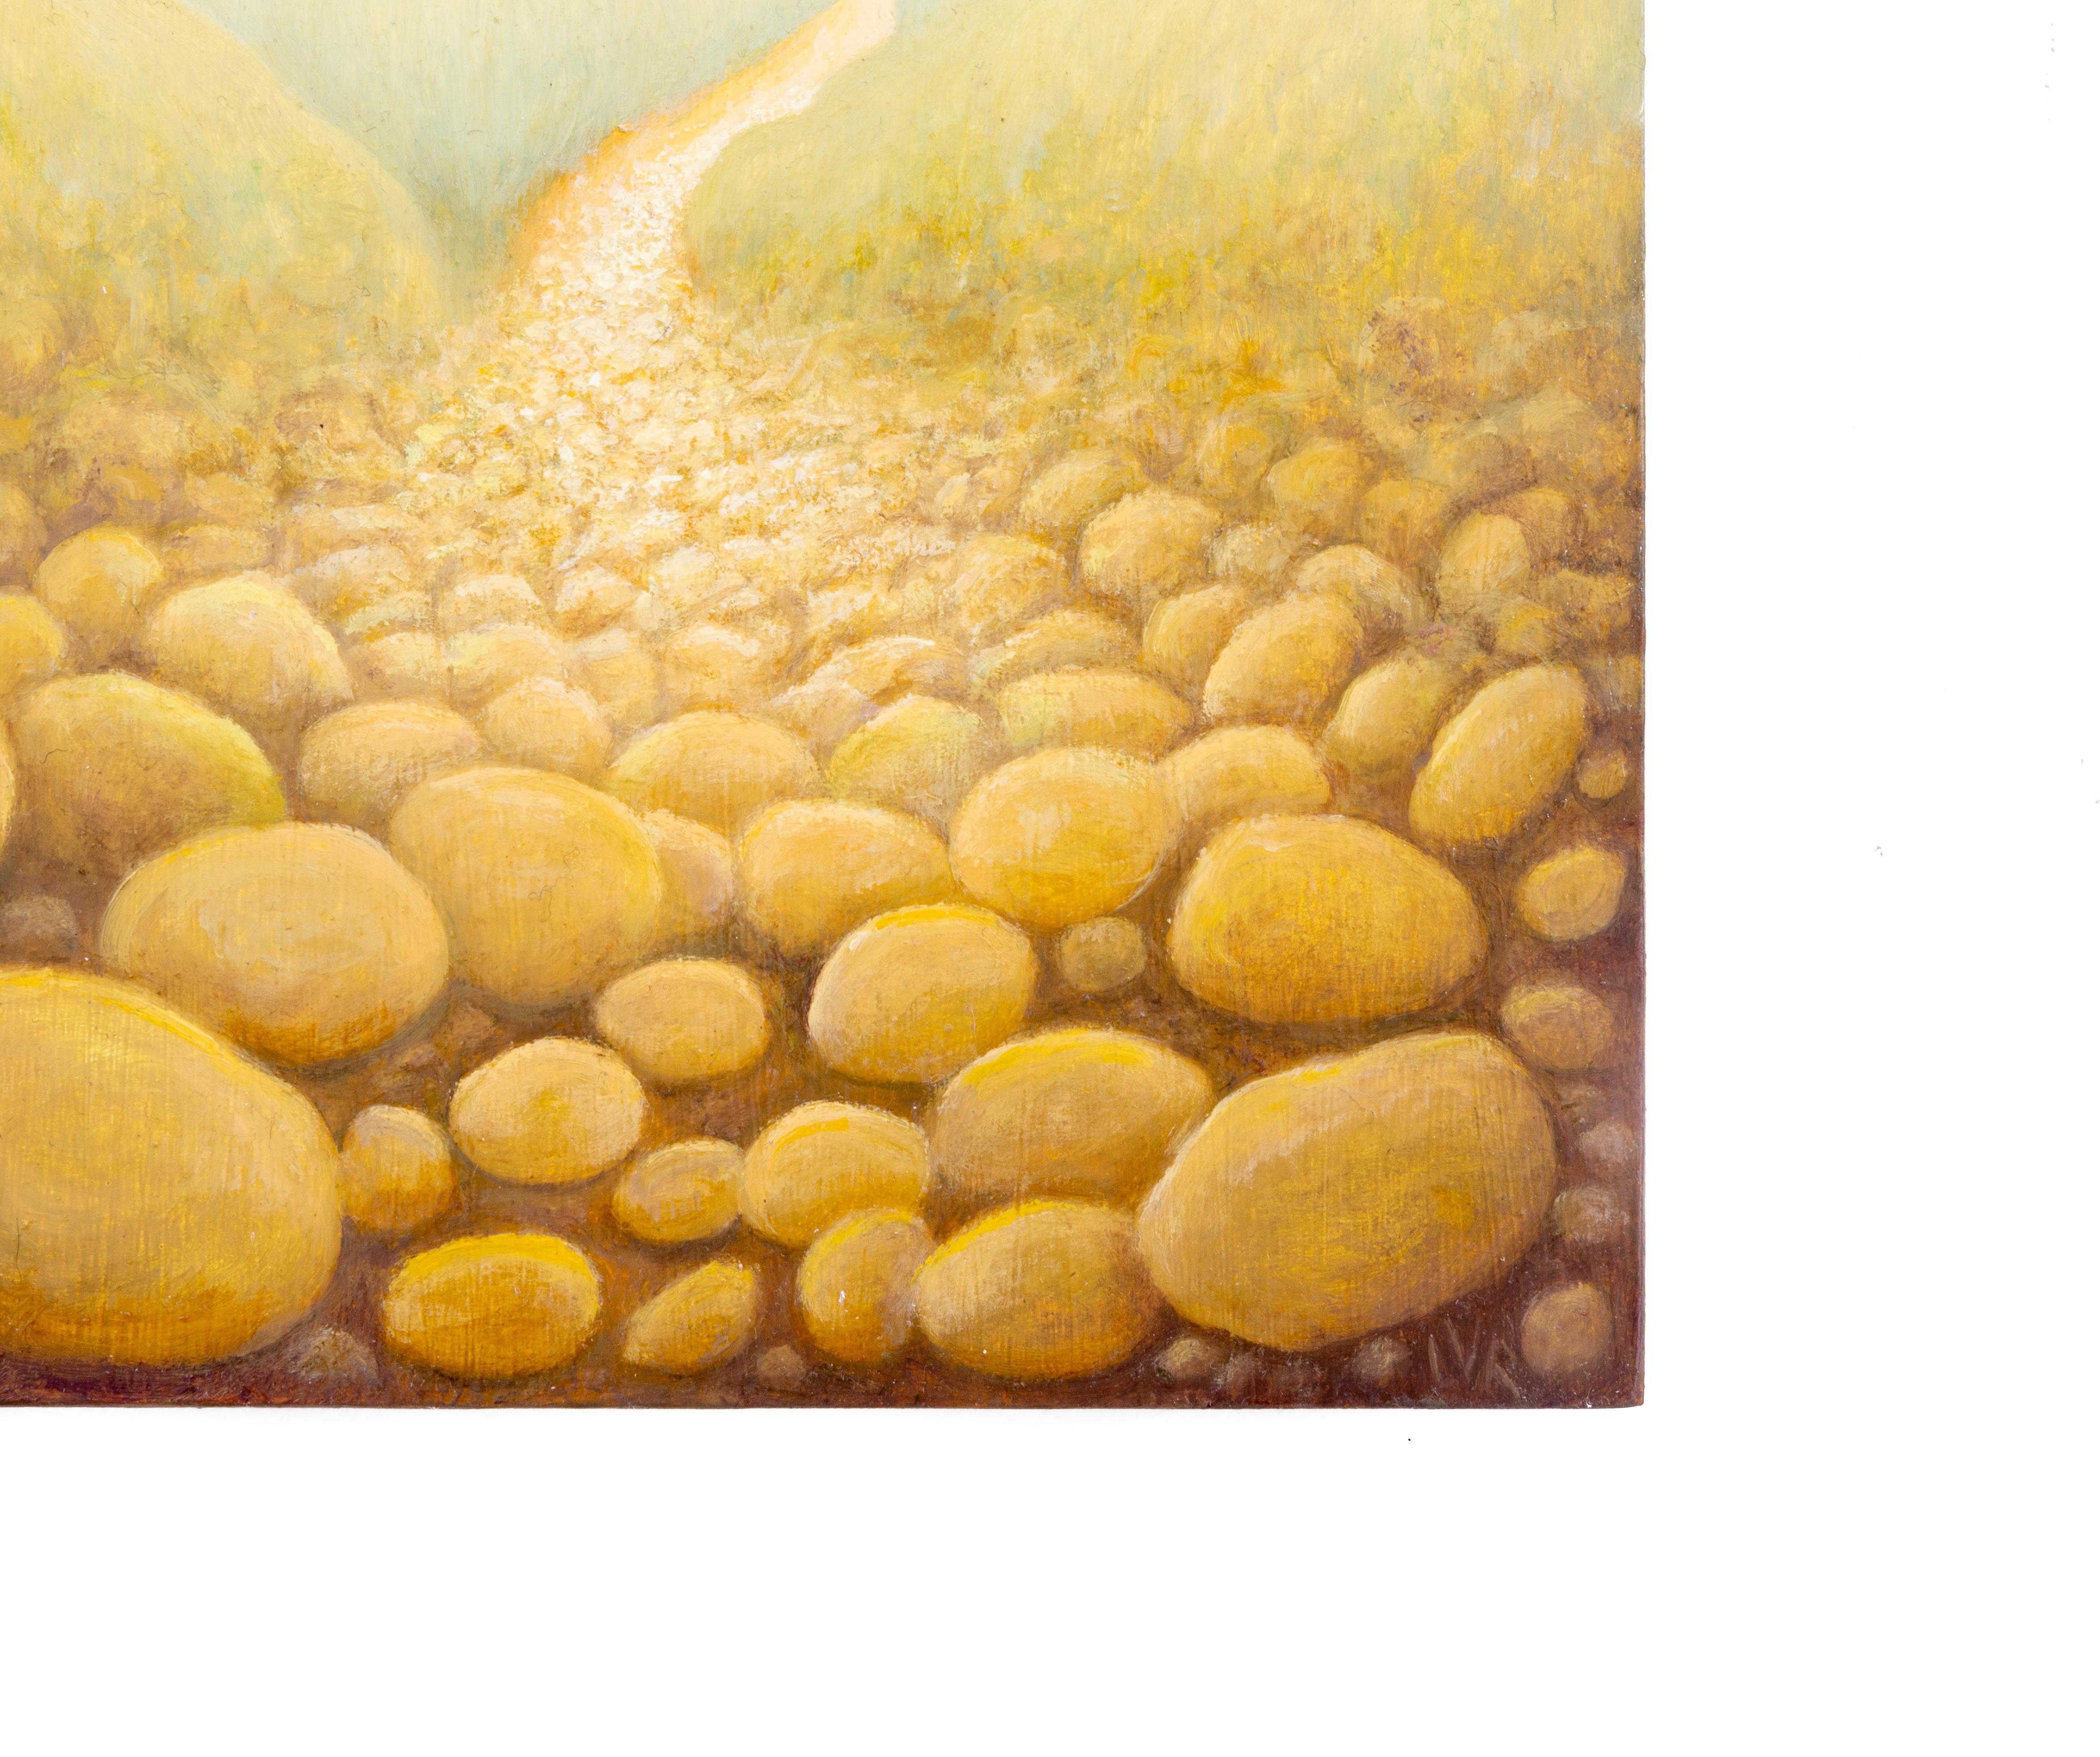 Small, intimate landscape painting of a rocky trail on a mountains with yellow and golden earth tones 
Rocky Path, painted by Laura Von Rosk in 2021
8 x 8 x 1 inches, oil on wood 
Currently unframed, the painting continues unto the sides so framing